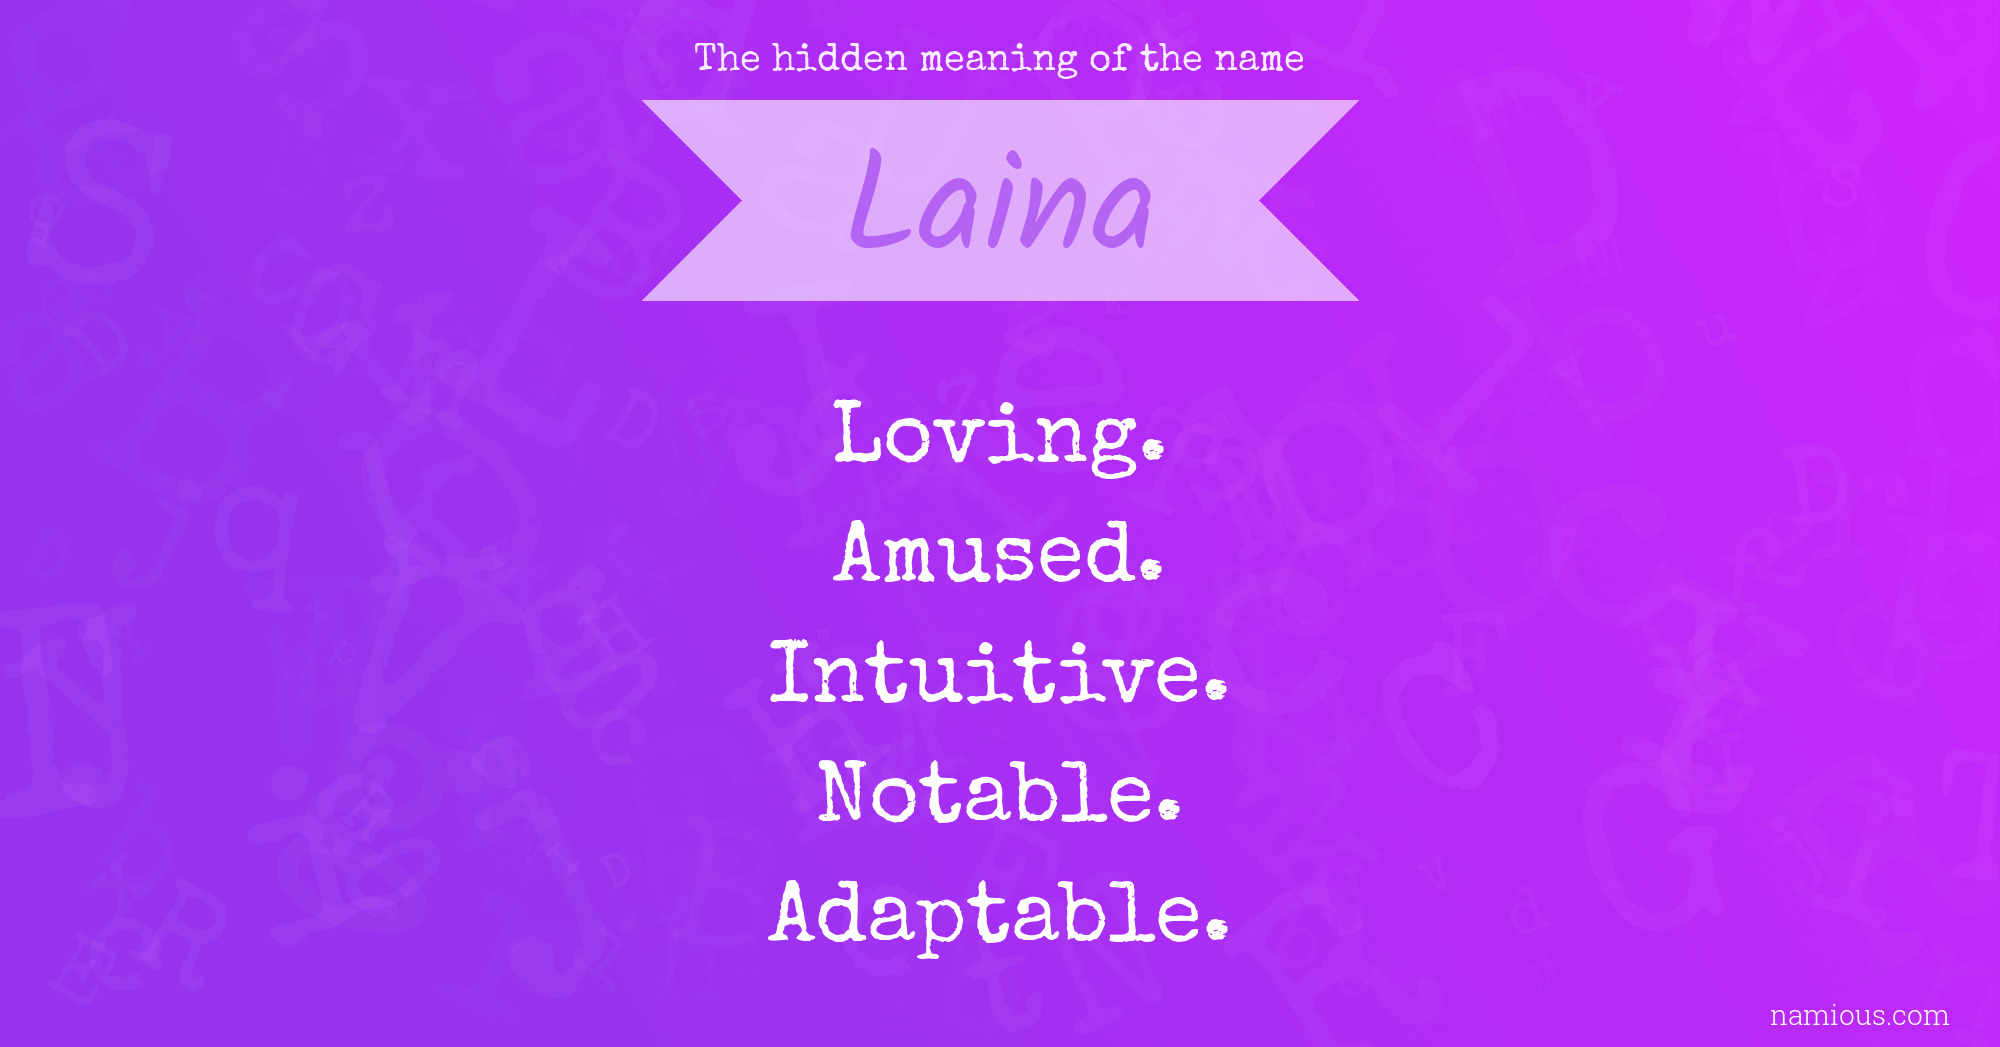 The hidden meaning of the name Laina